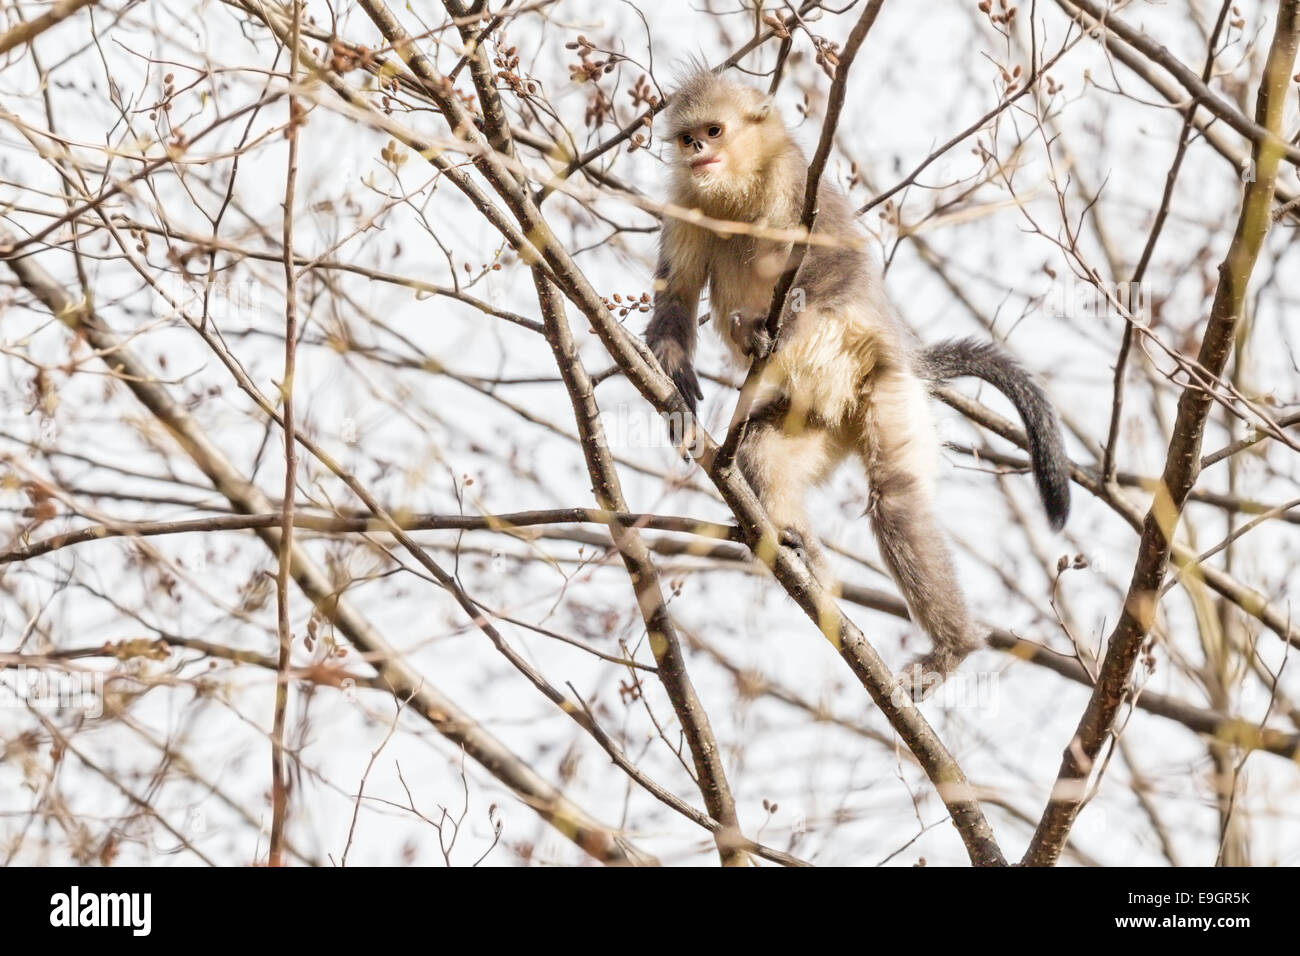 Juvenile Yunnan Snub-nosed Monkey (Rhinopithecus bieti) scaling a tree in search of food Stock Photo